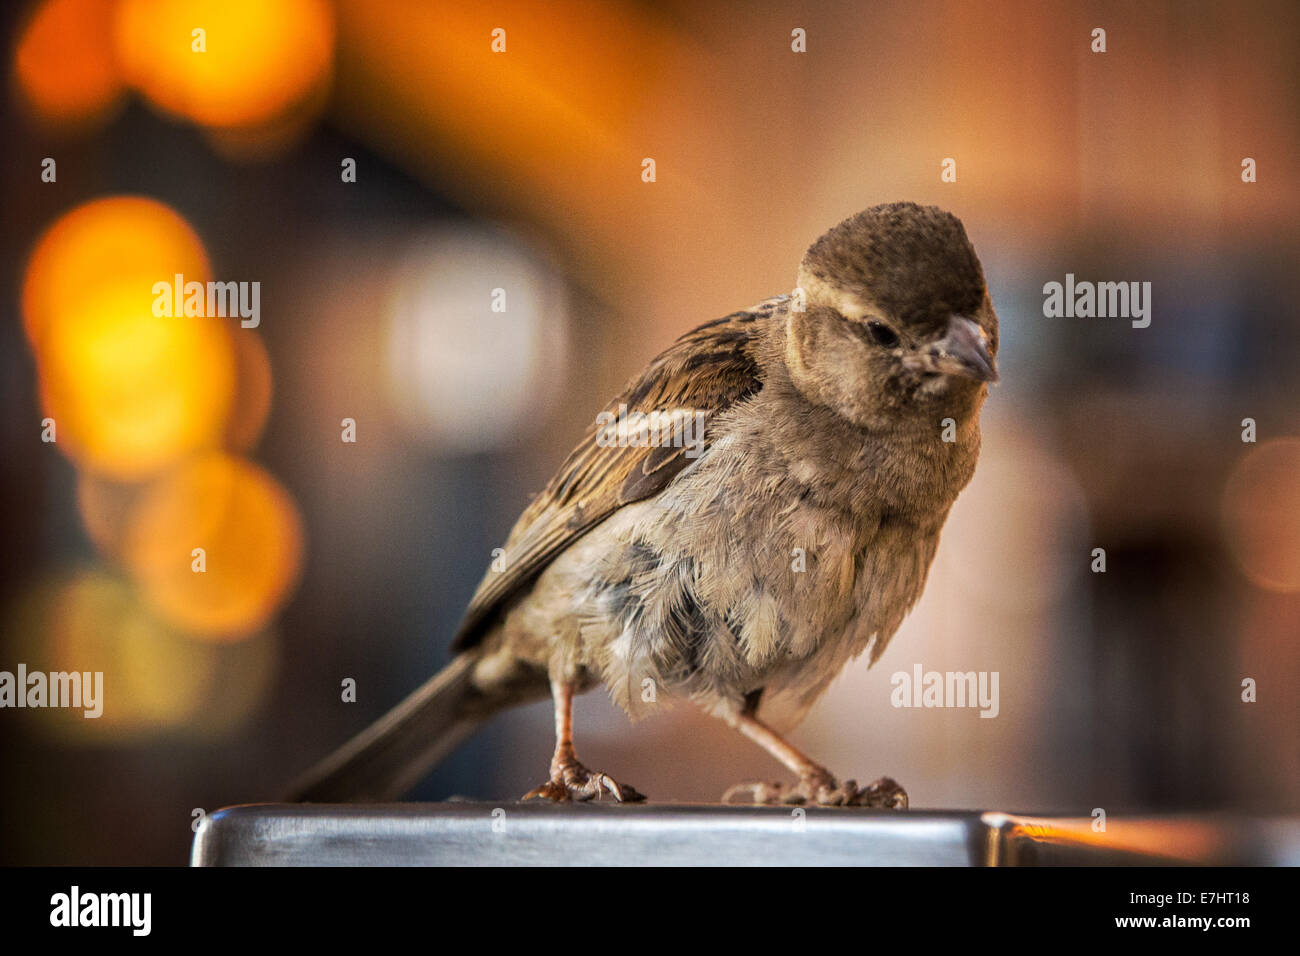 Sparrow sitting with head tilted looking down Stock Photo